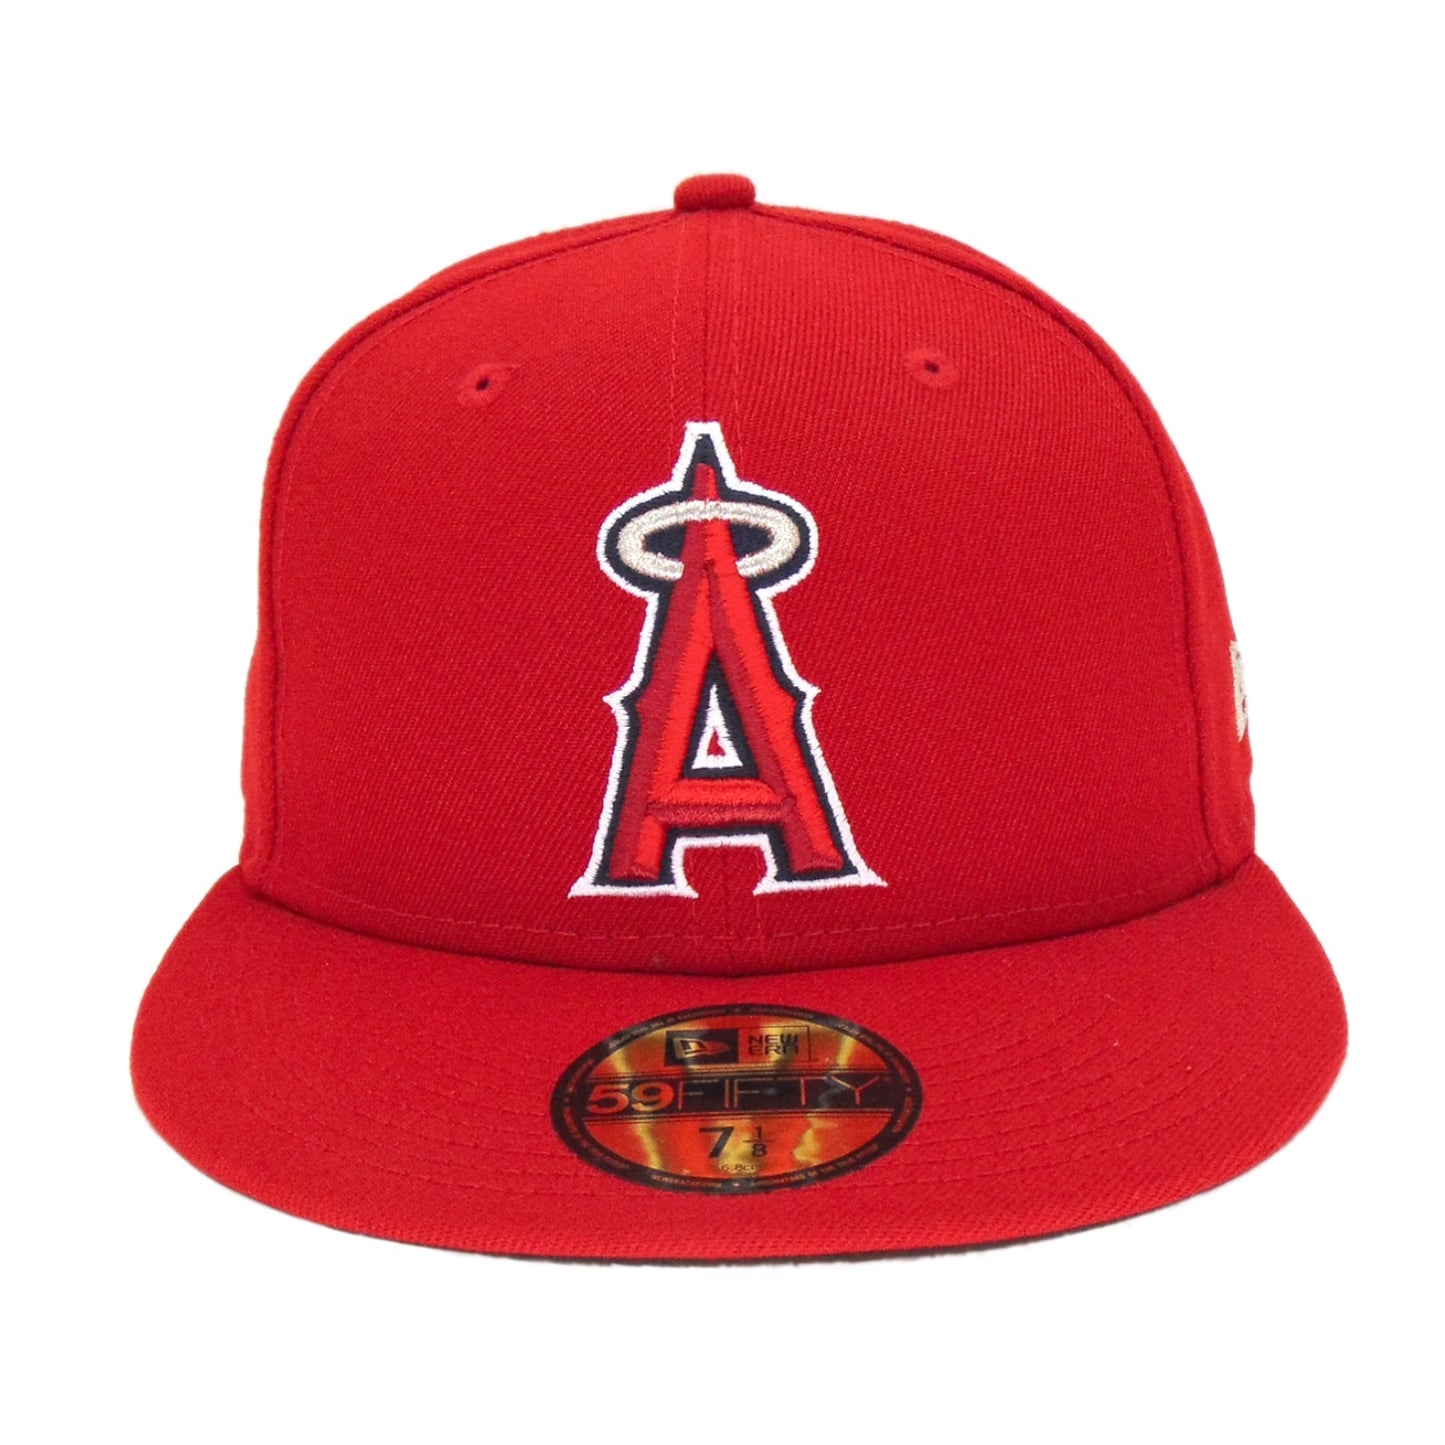 Anaheim Angels Authentic New Era 59FIFTY Cap Red